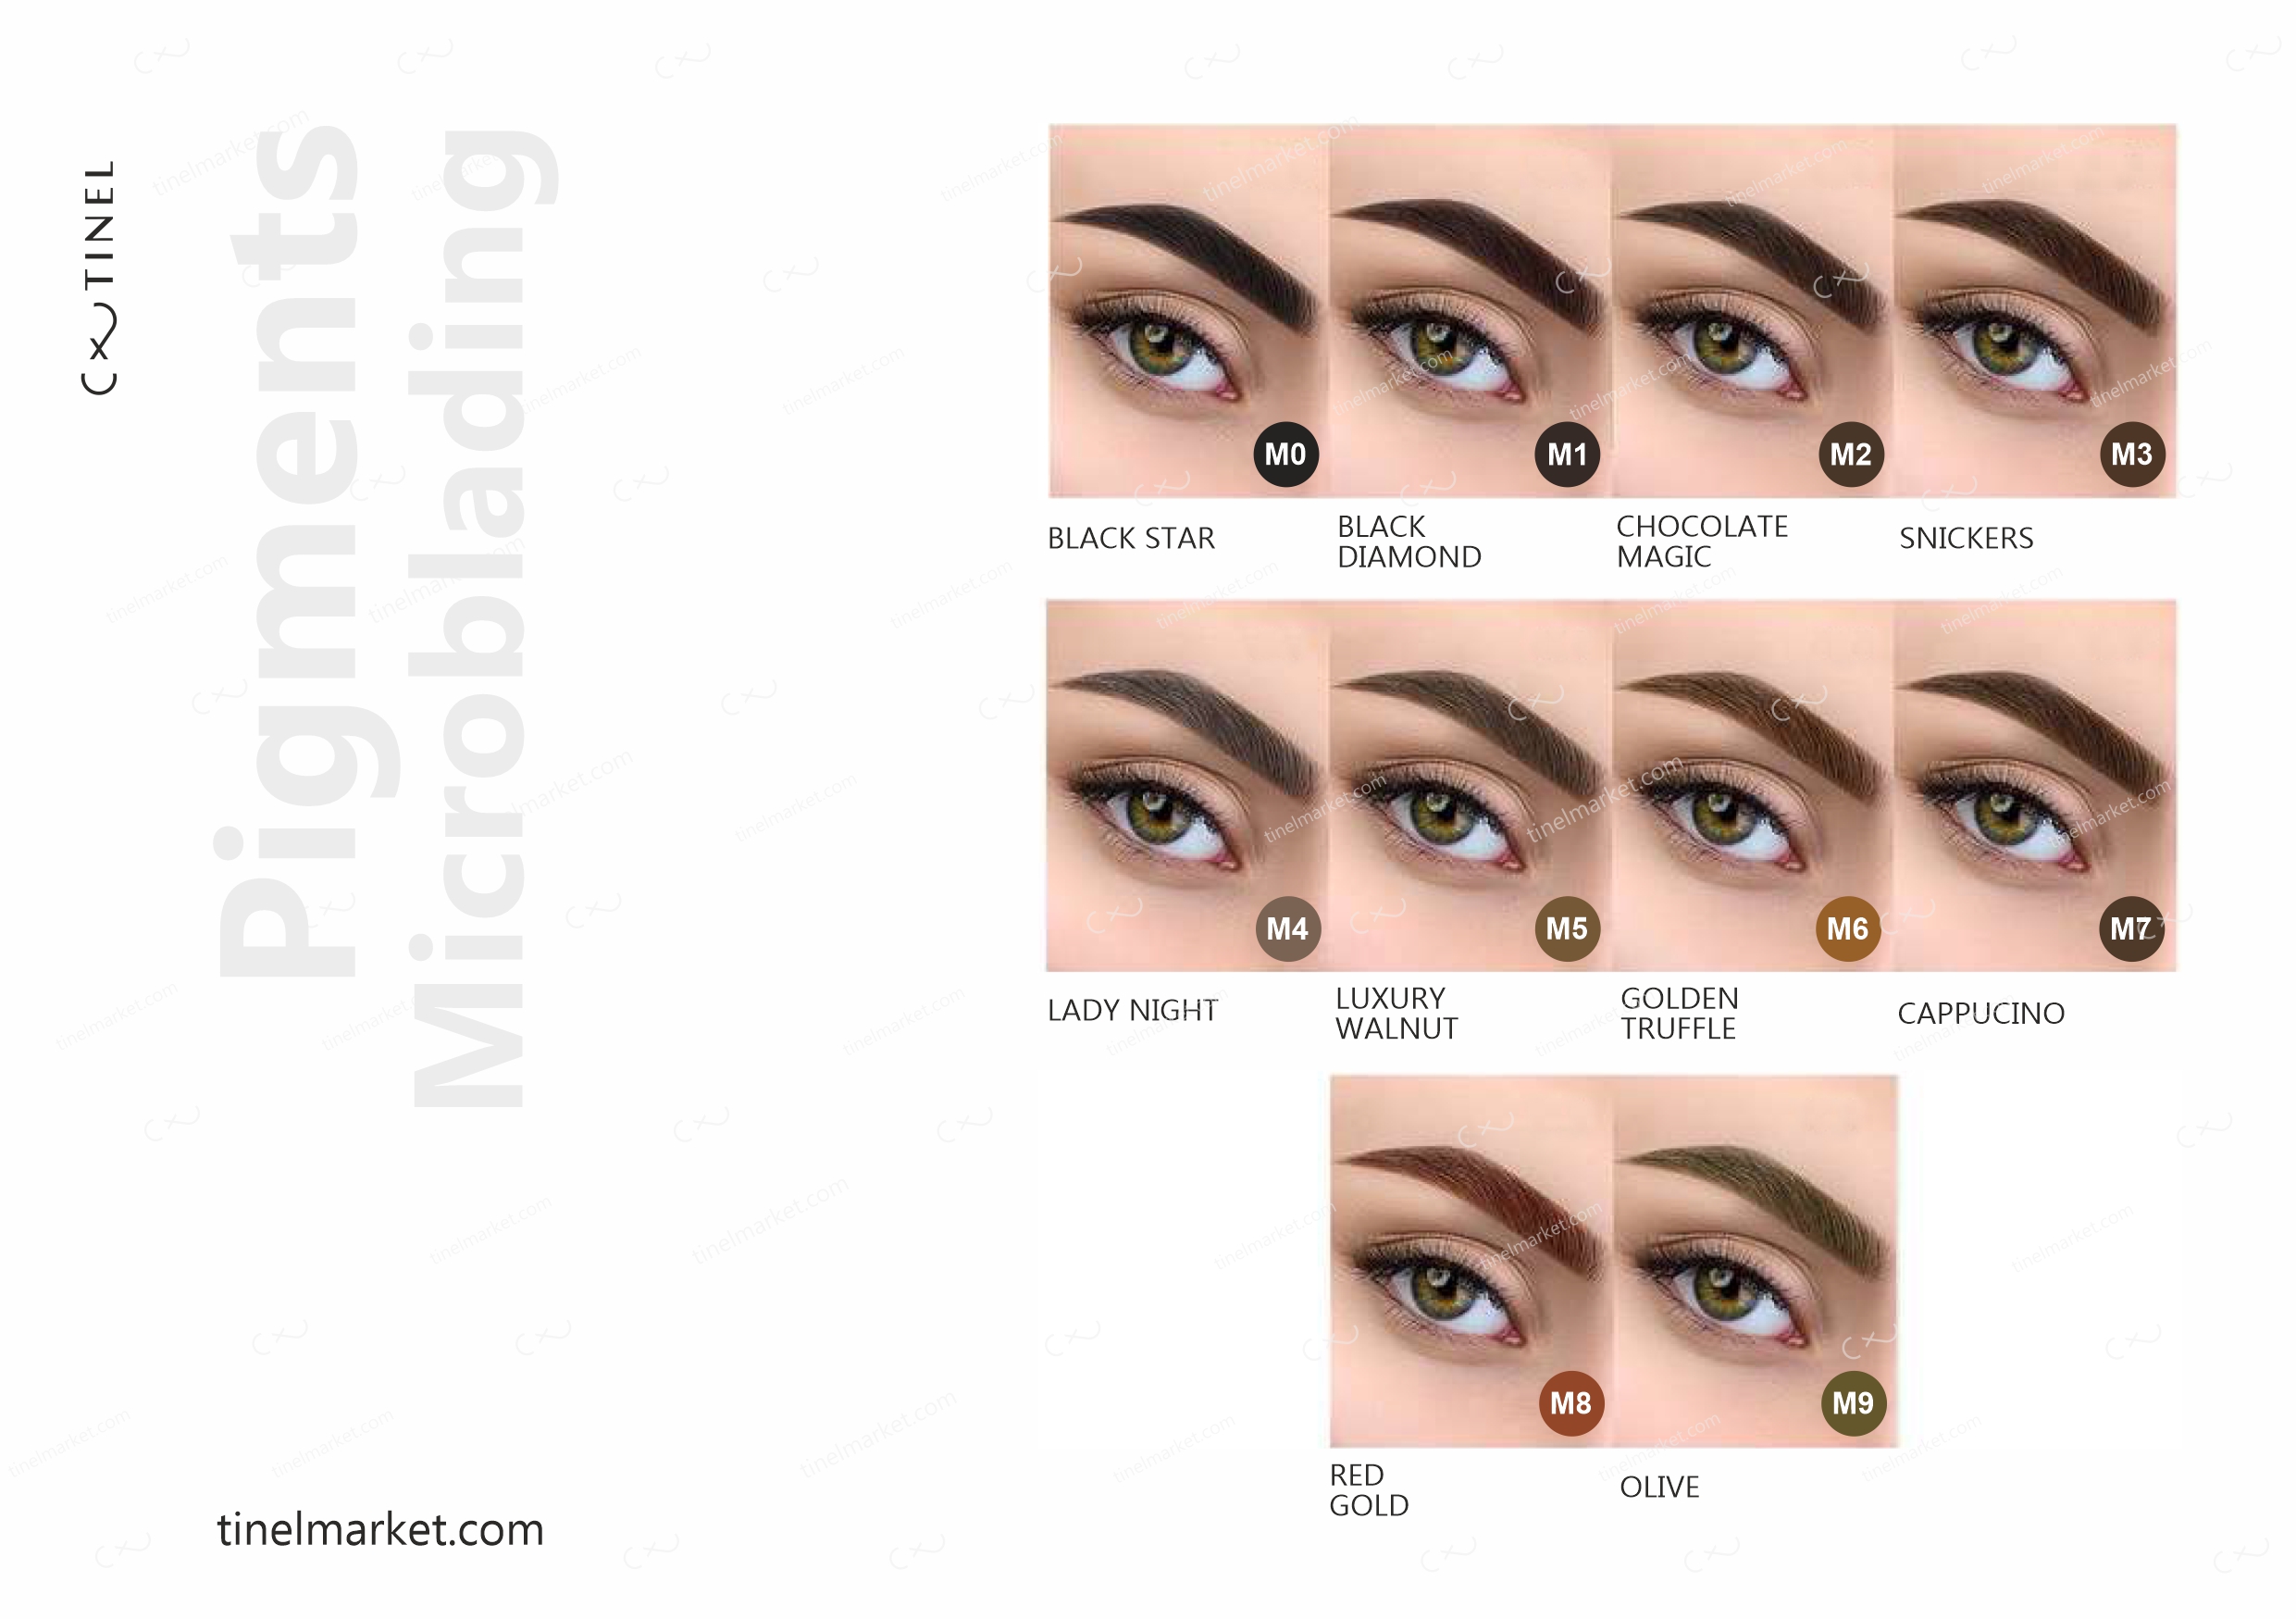 Tinel pigments for eyebrows microblading